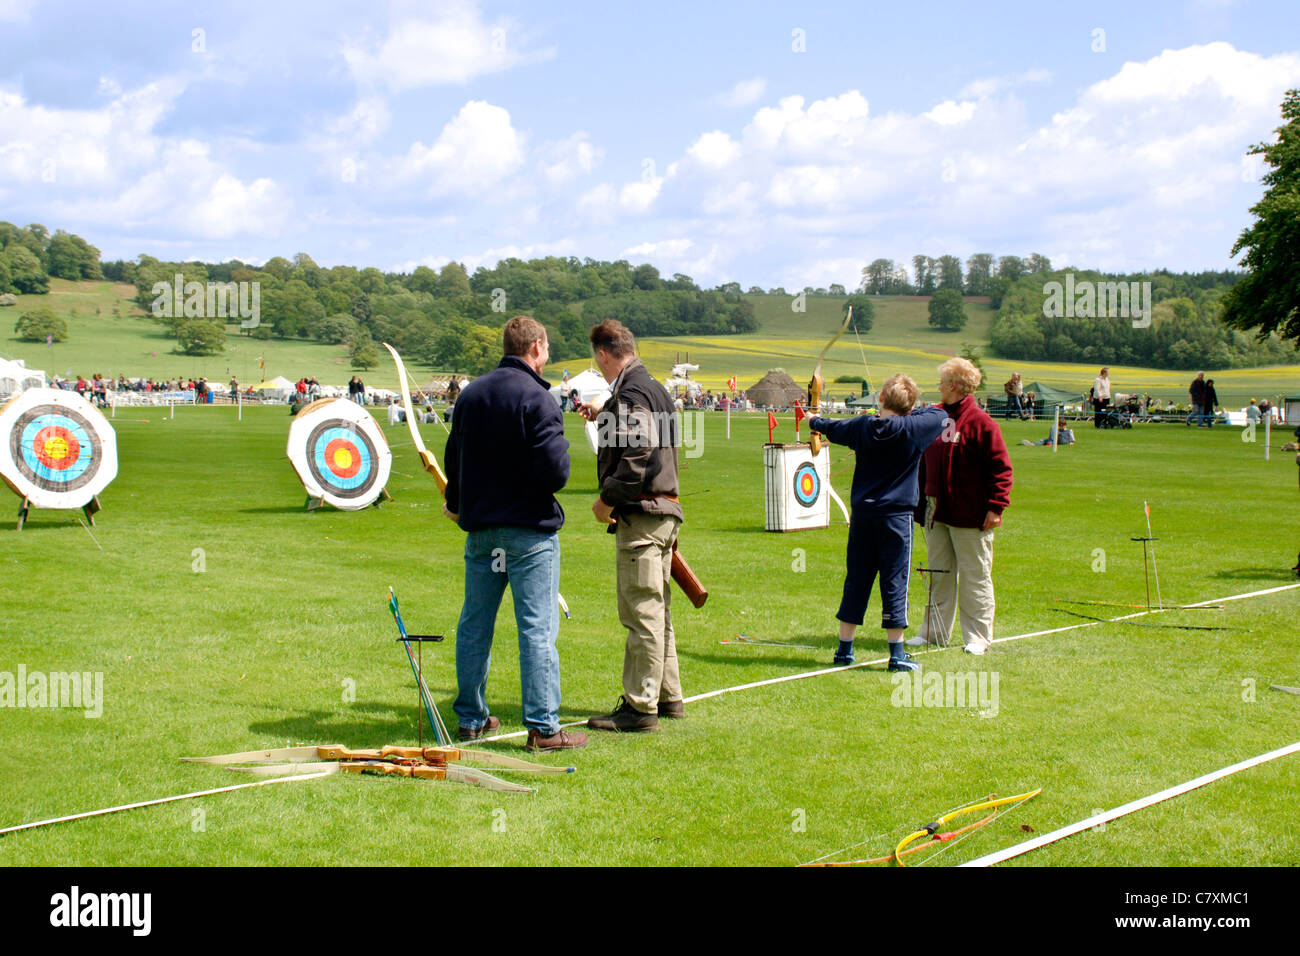 People having a go at Archery with trained instructors at an outdoor sports venue Stock Photo